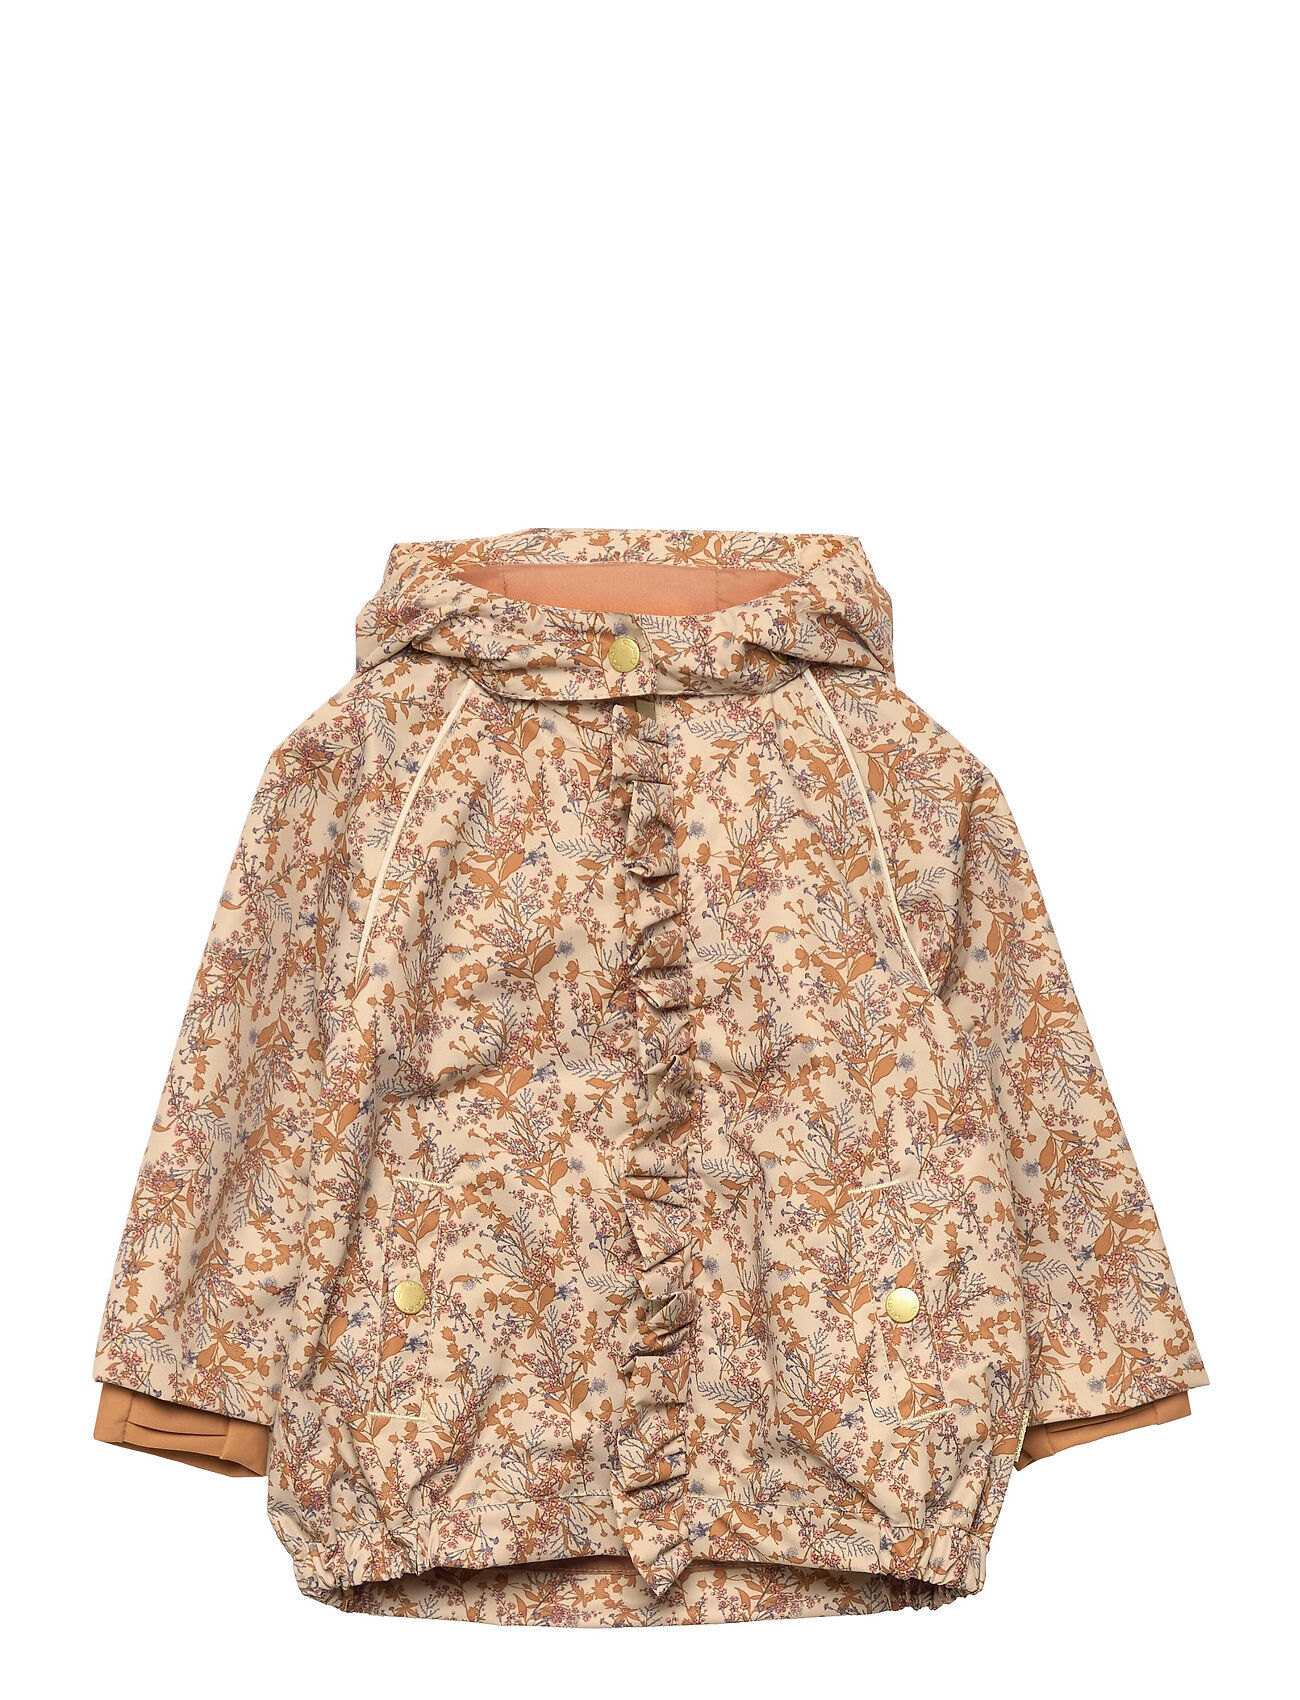 Hust & Claire Odga - Jacket Outerwear Shell Clothing Shell Jacket Multi/mønstret Hust & Claire